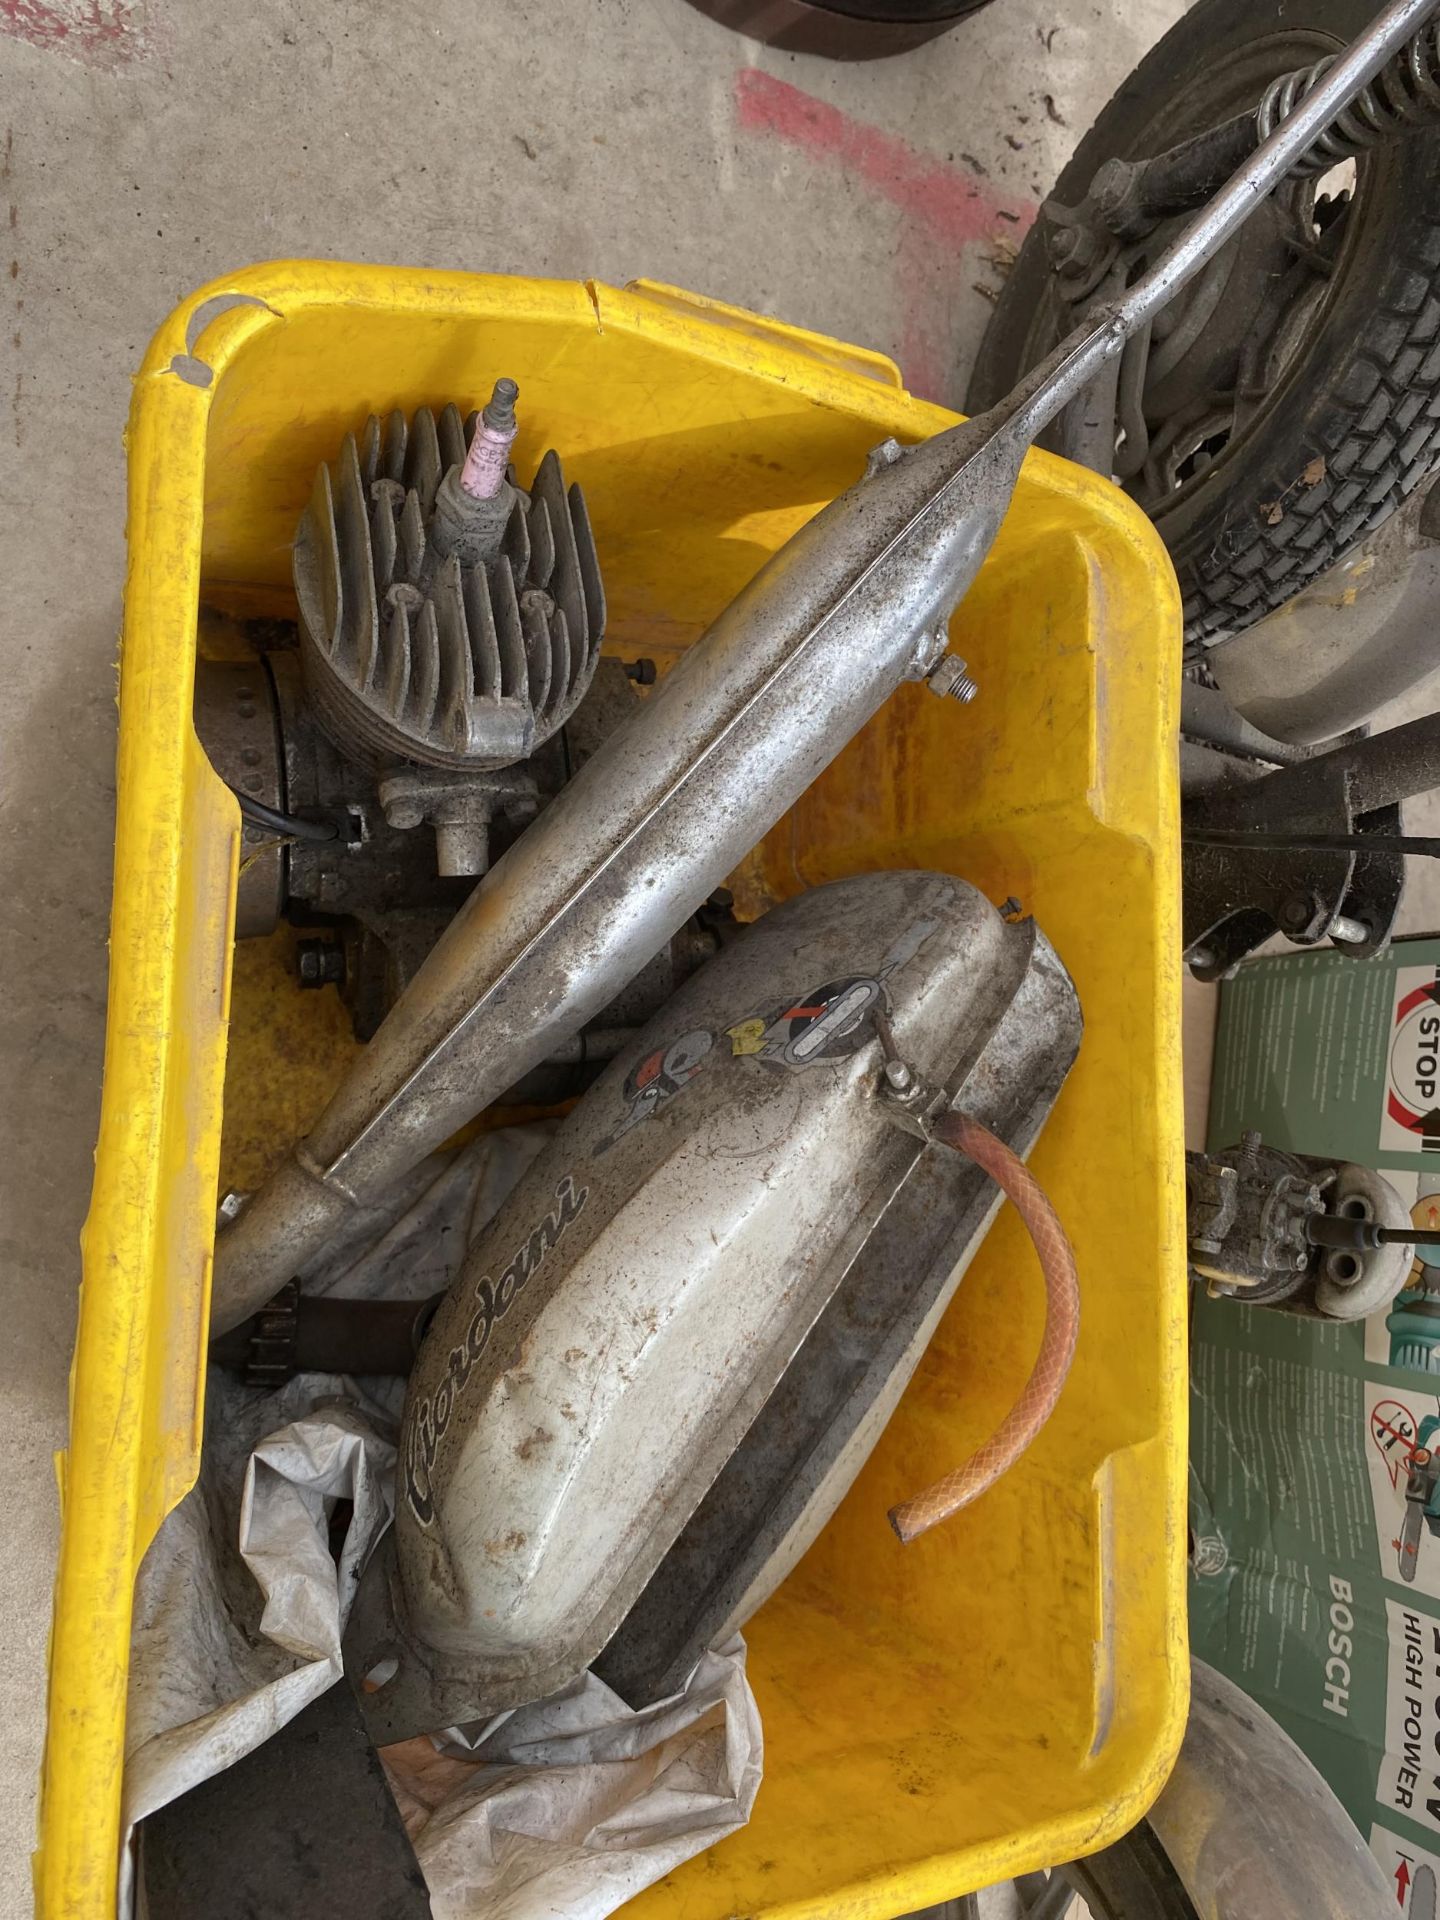 A SMALL MOTORBIKE AND SPARE PARTS FOR RESTORATION - Image 3 of 6